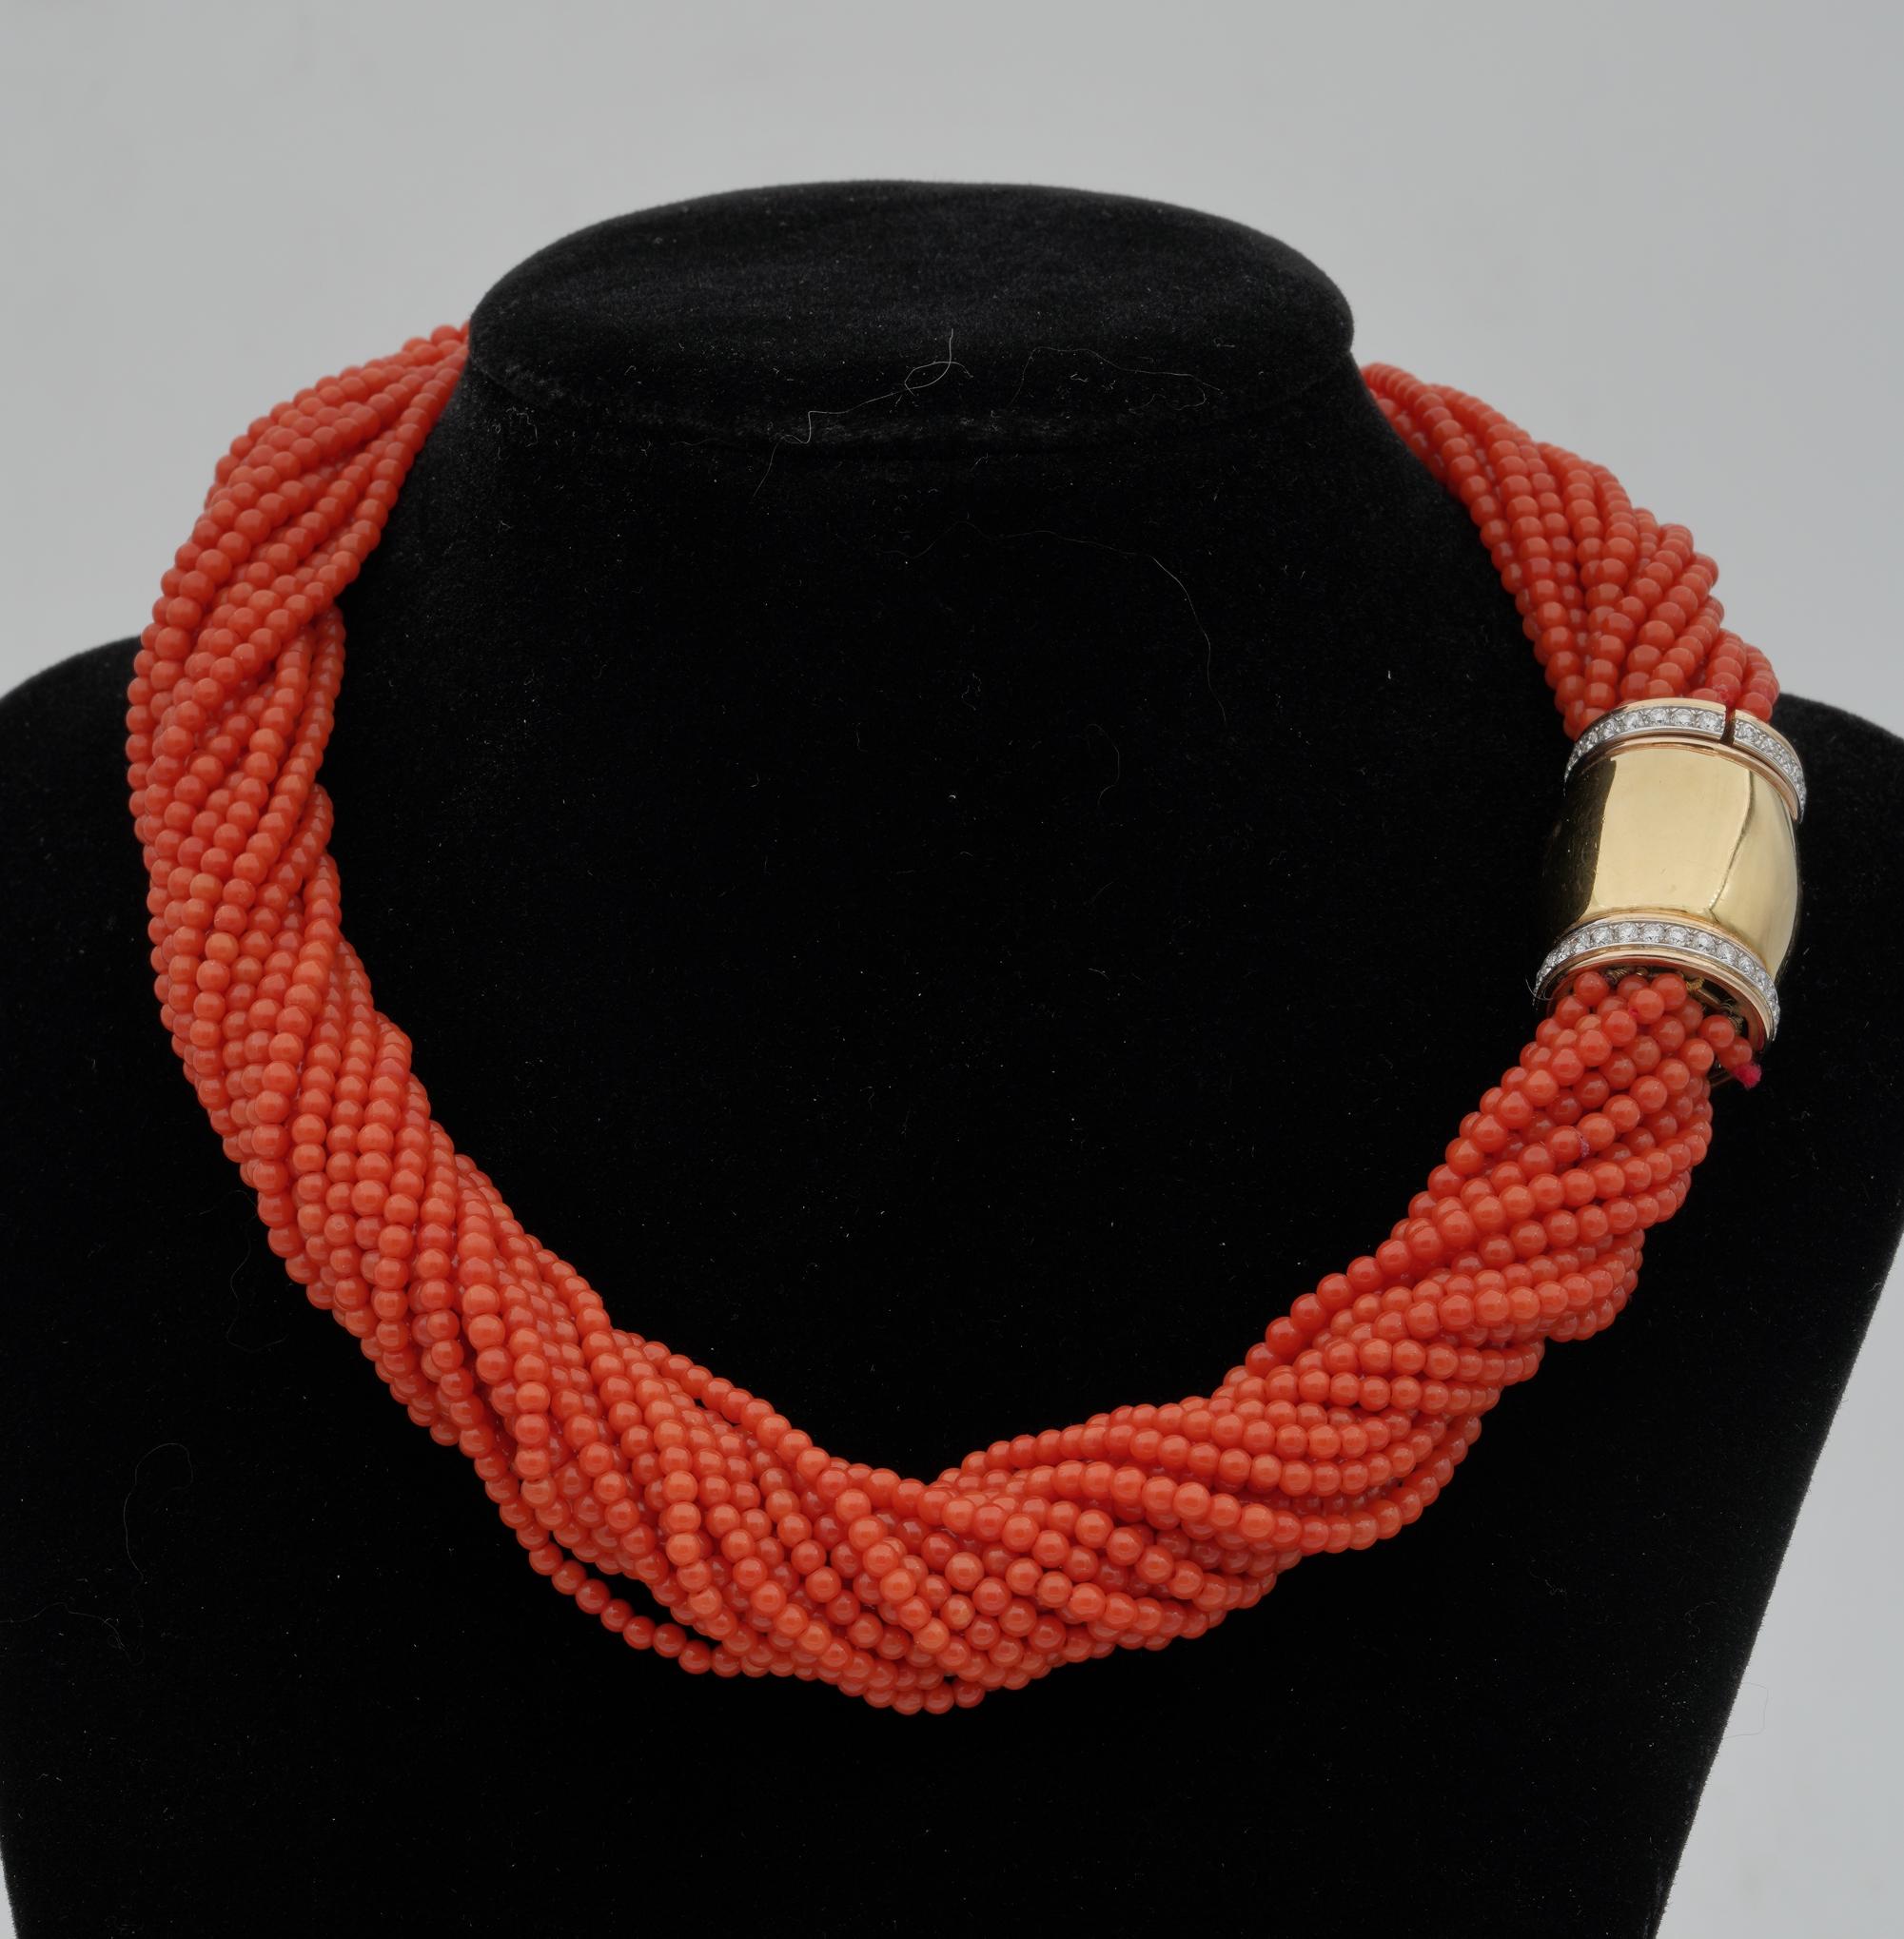 Allure of Coral

This captivating mid century necklace is Italian origin
Composed by 21 strands of highly selected, natural, untreated Coral of Red Salmon colour, 3 mm. beads all uniform, blemish free, matched to form this high quality vintage